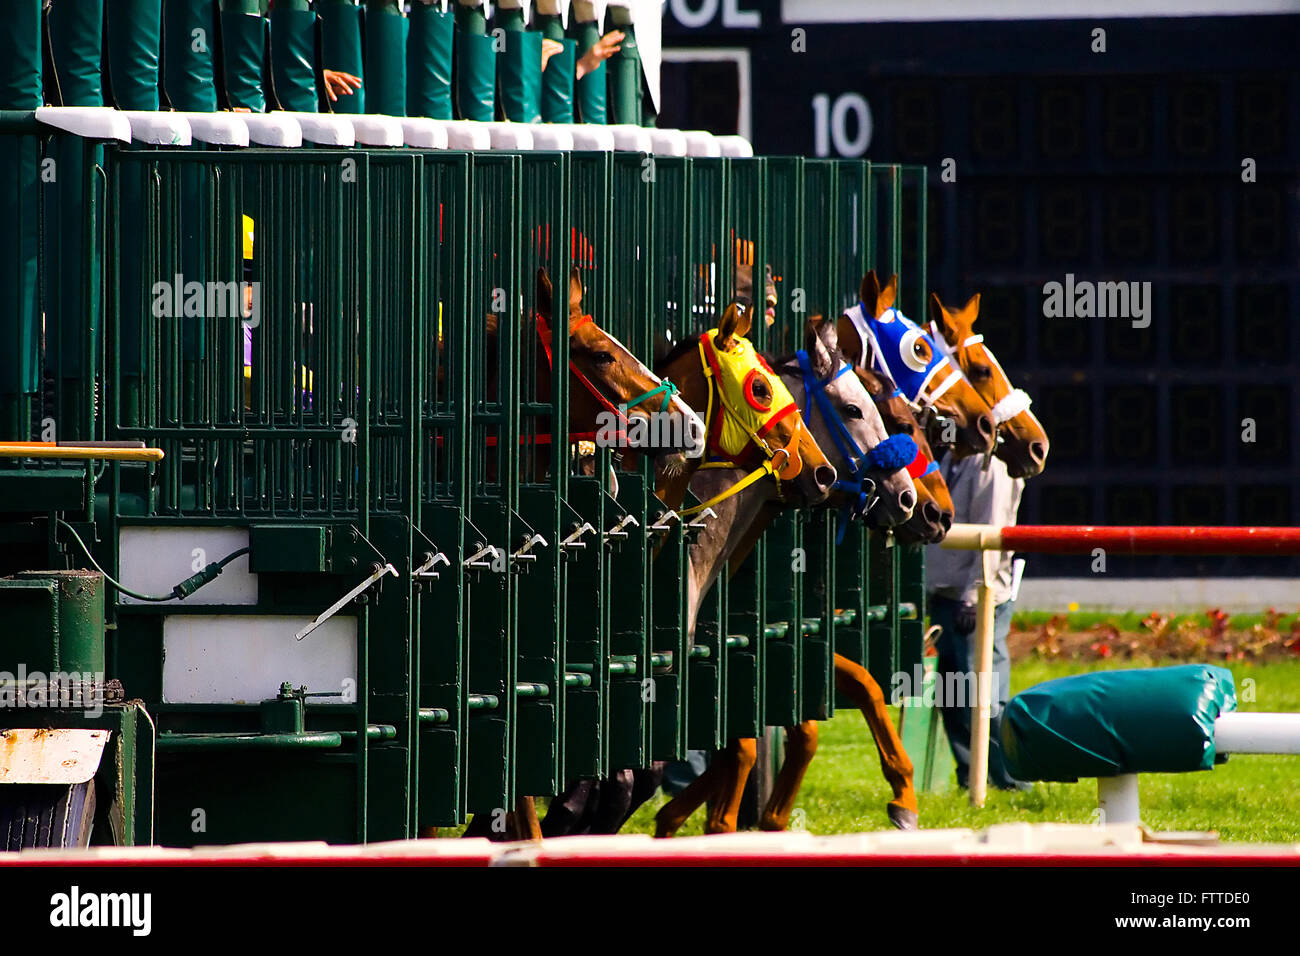 Thoroughbred race horses breaking from the starting gate. Stock Photo